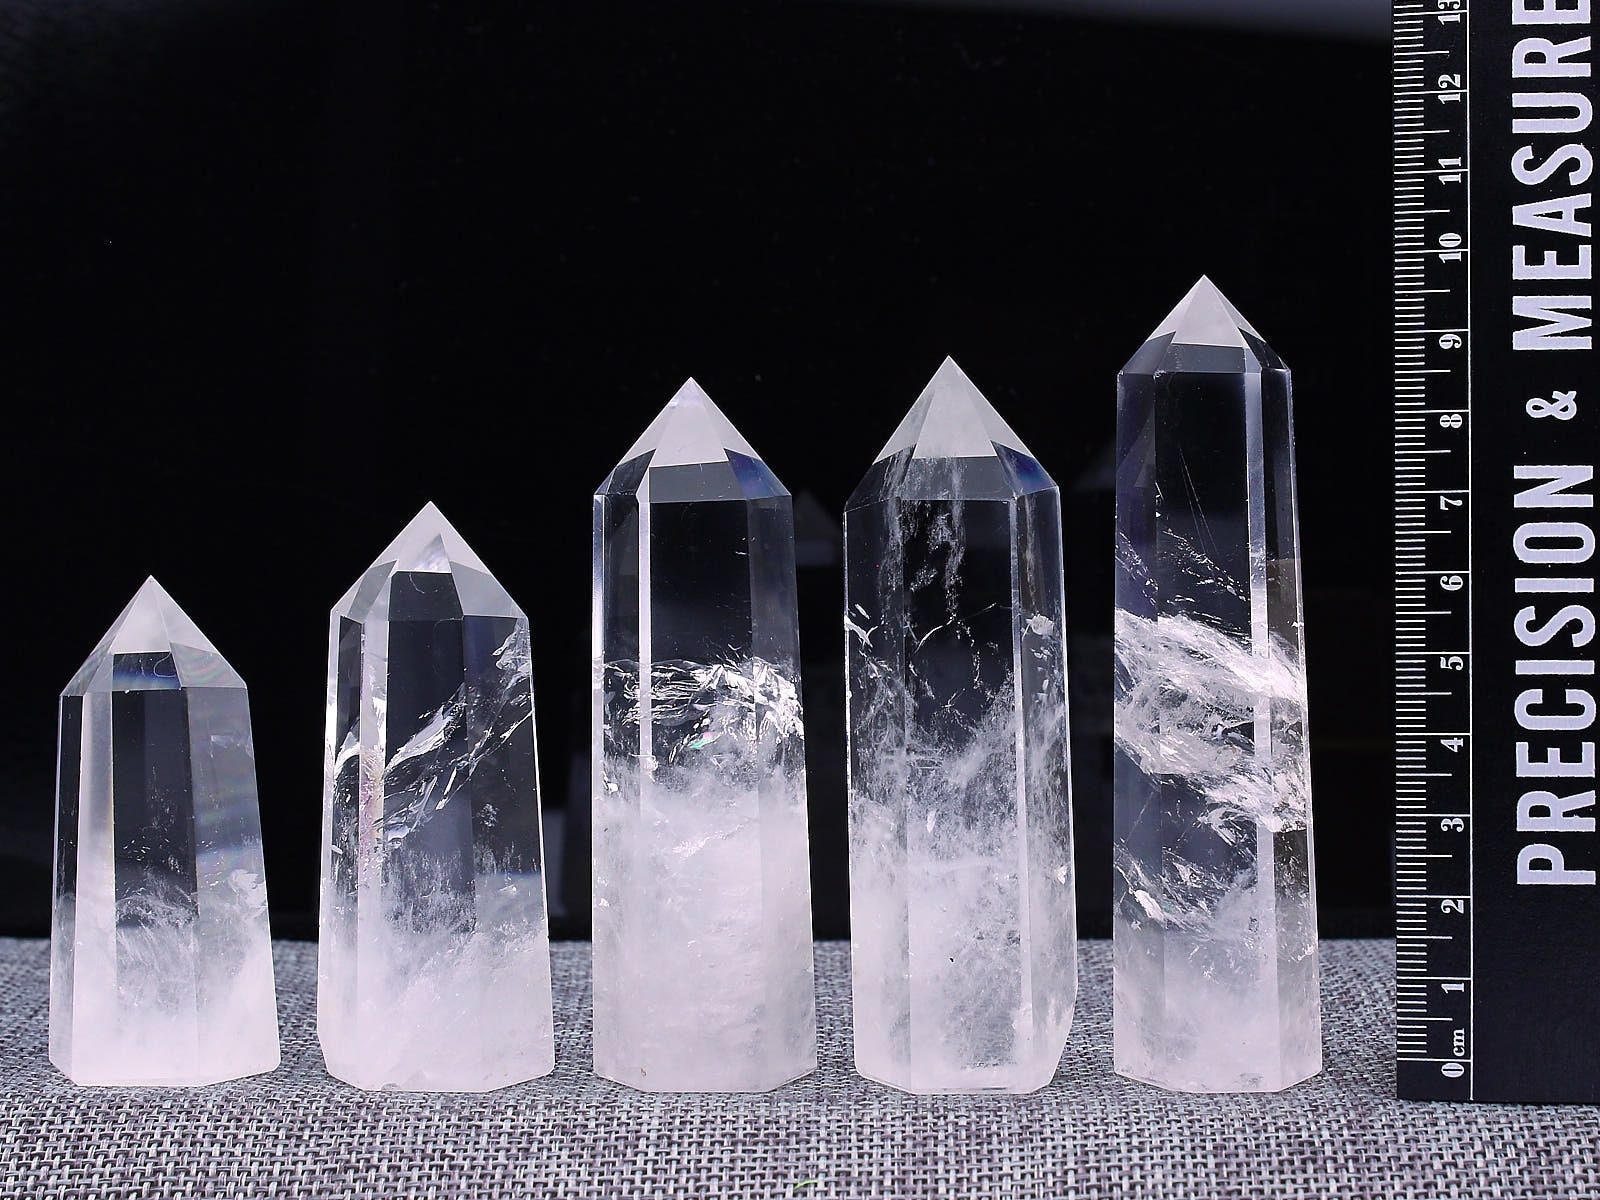 Details about   1PCS AAA 100% NATURAL Rock CLEAR QUARTZ CRYSTAL DT WAND POINT Healing hot 